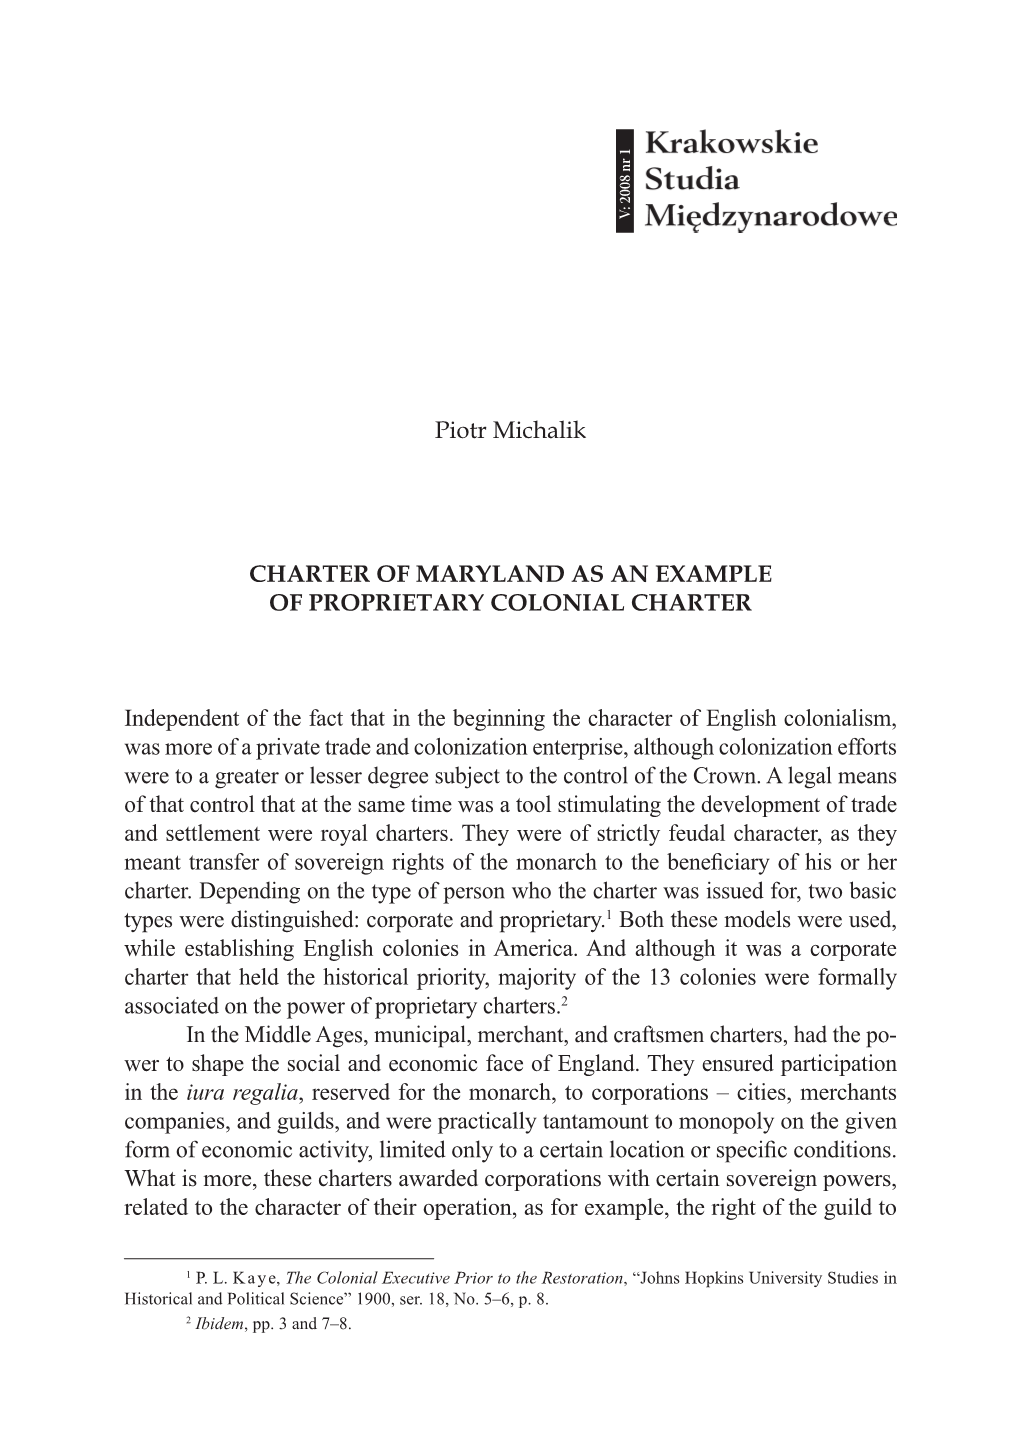 Charter of Maryland As an Example of Proprietary Colonial Charter